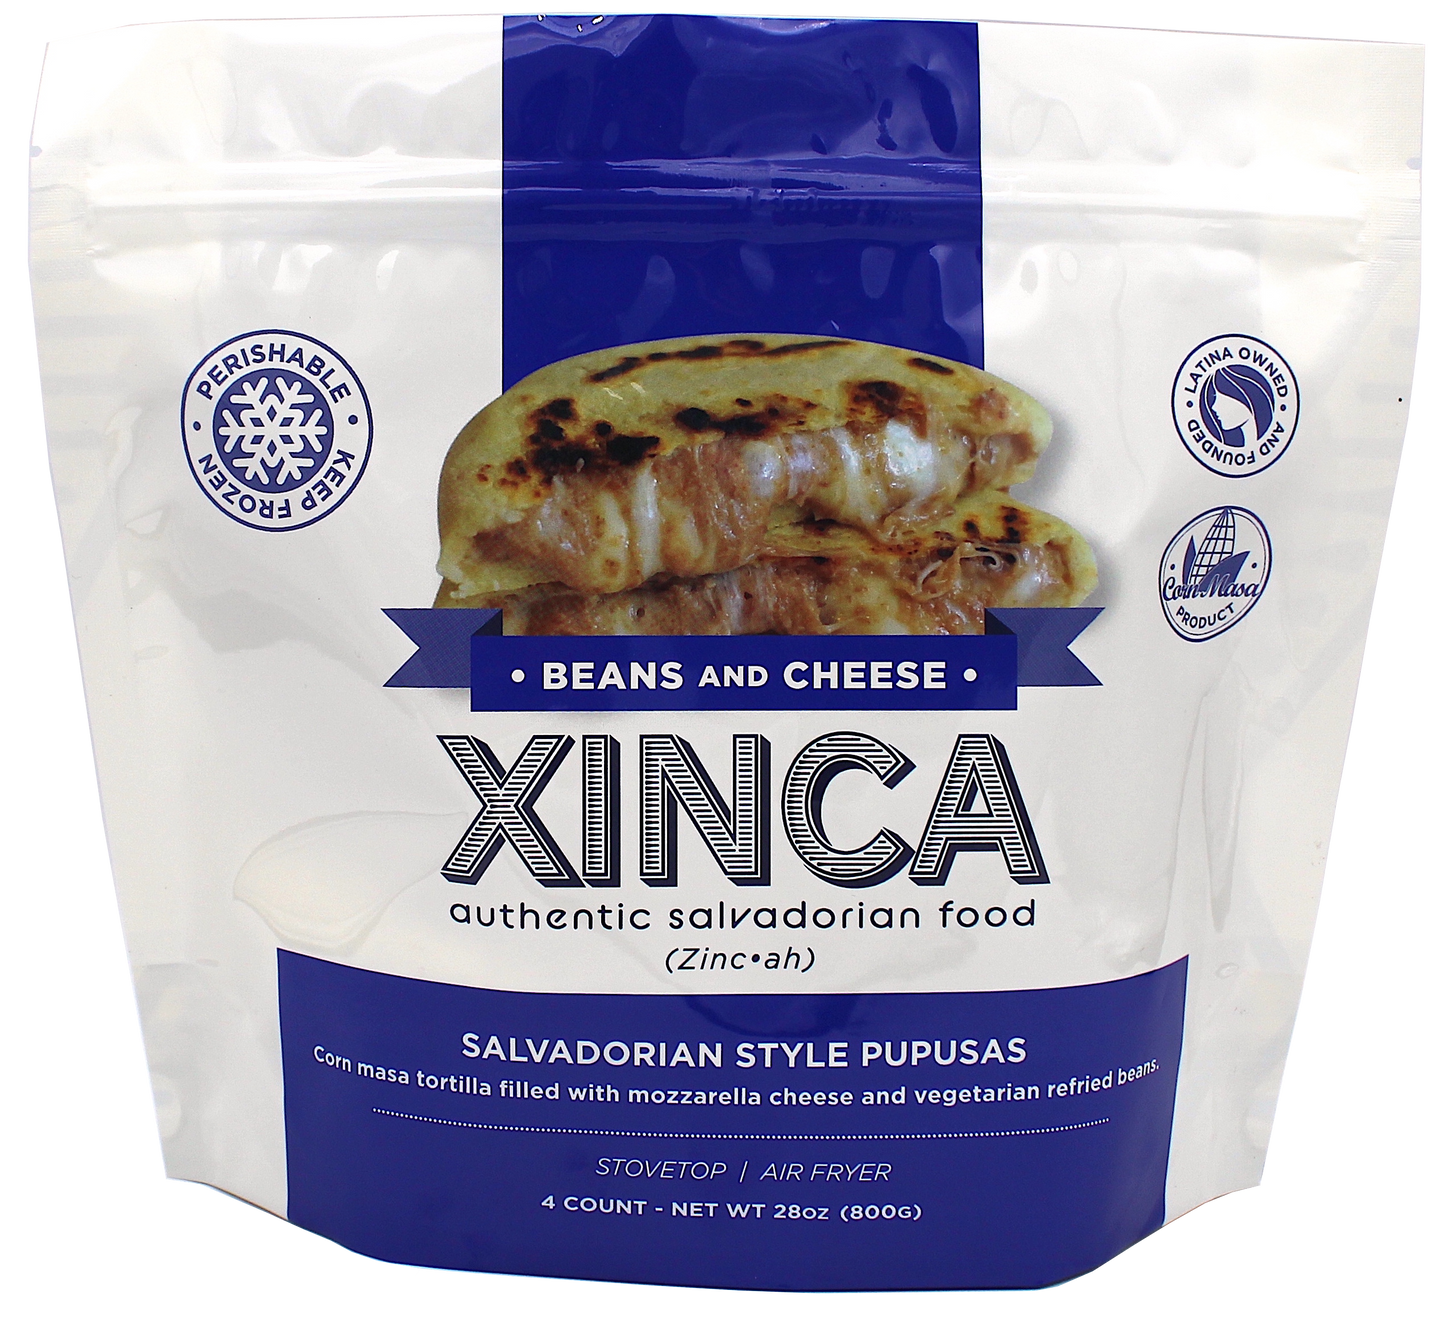 Beans & Cheese Pupusas retail packaging. Blue and white with perishable keep frozen widget, corn masa product & Latina Owned and Founded